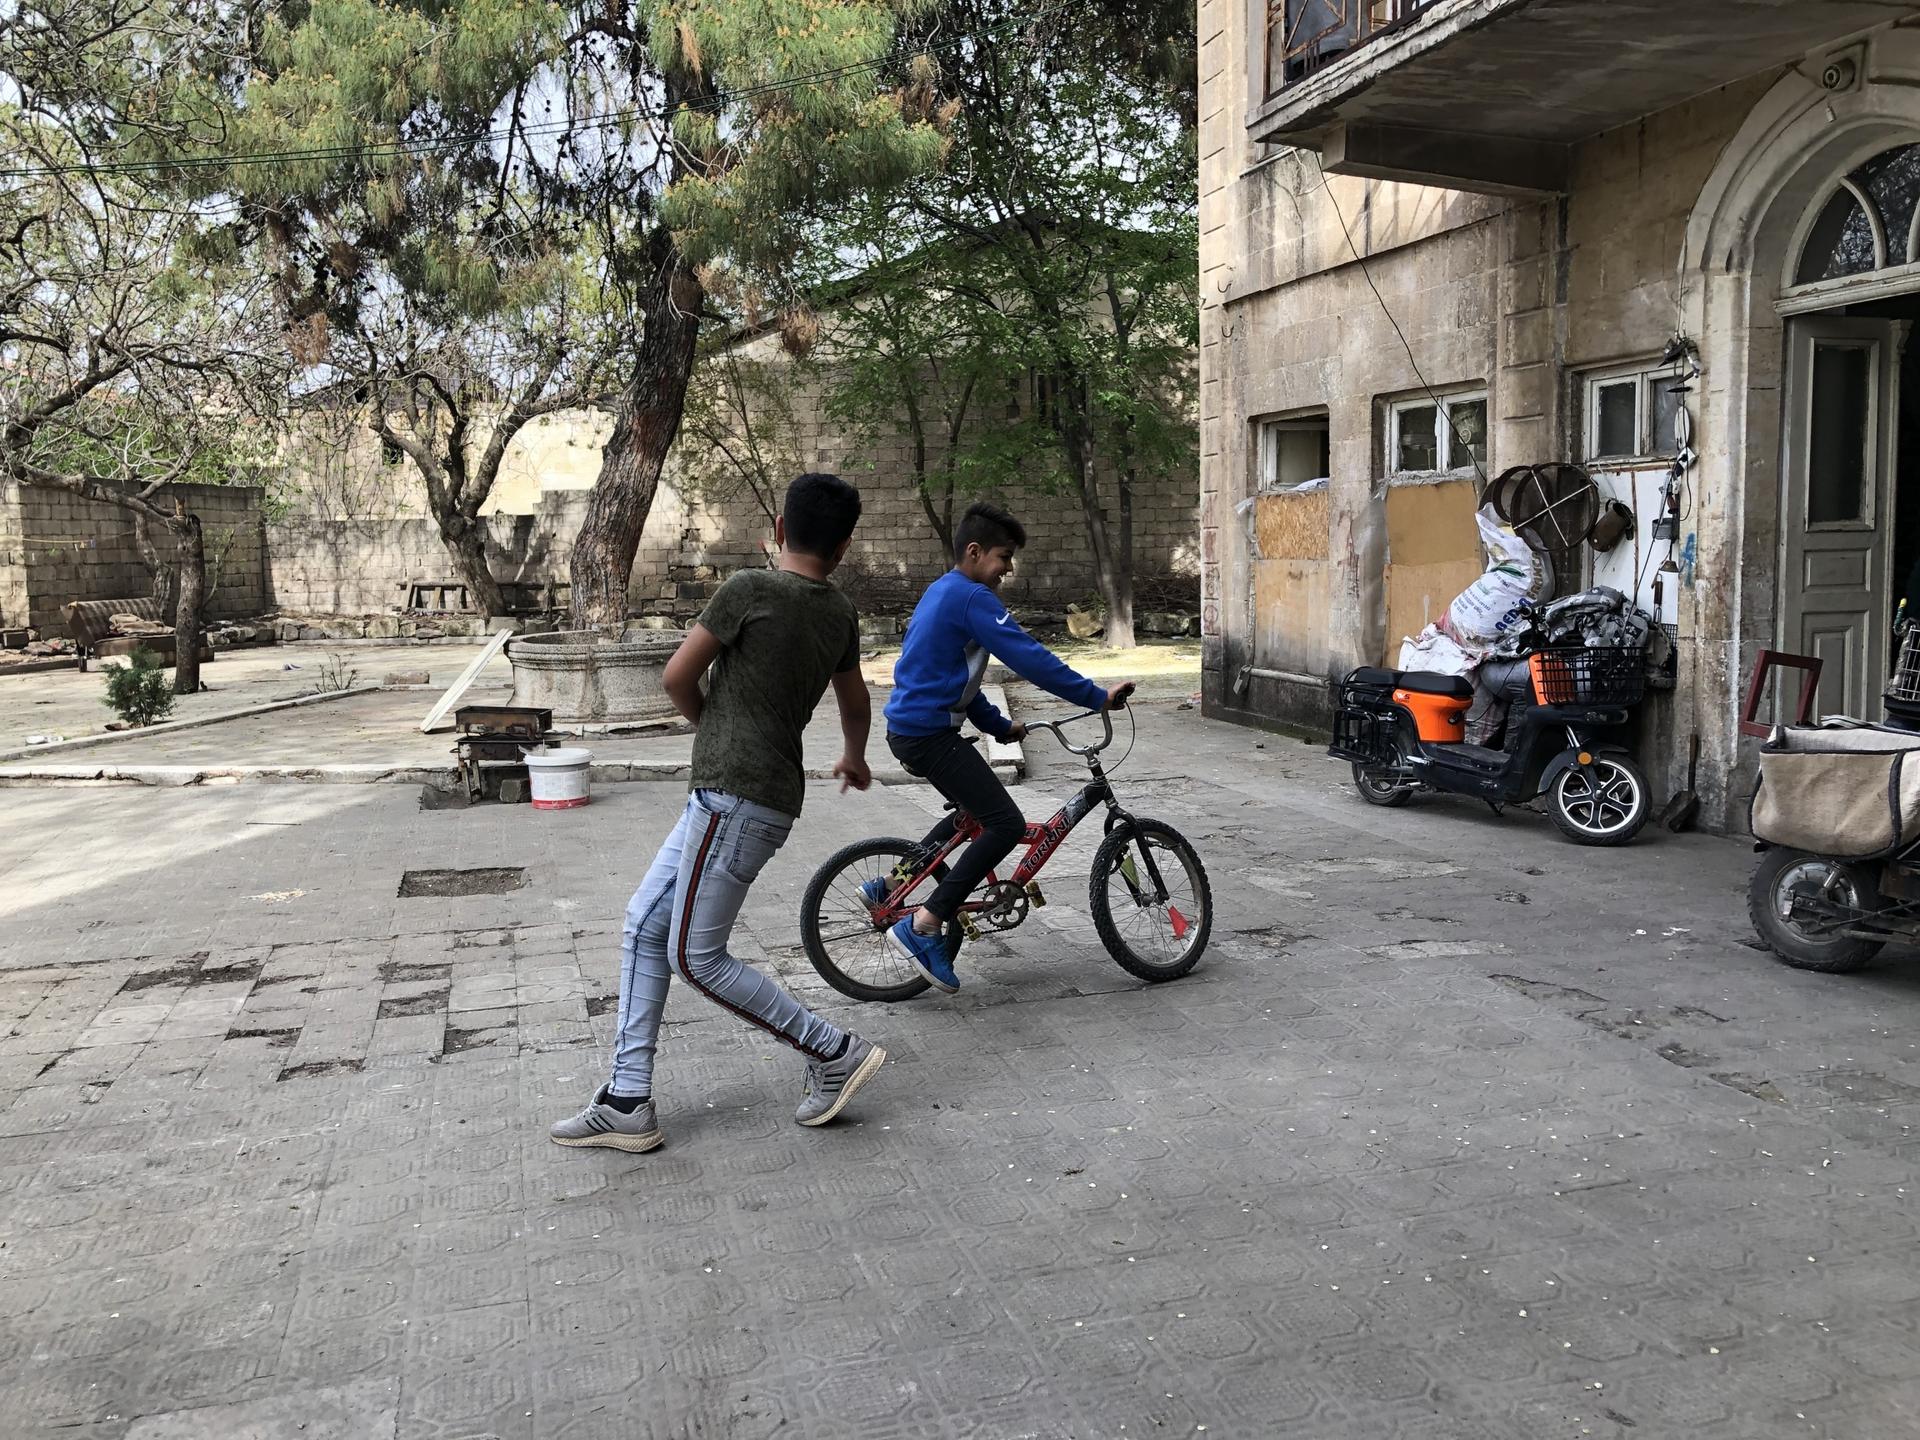 Salim Abdul Ghani has been checking in with Sharifa Riza and her four young sons since the start of the pandemic. They live in an abandoned house tucked away at the end of a narrow alleyway. Riza’s sons went to the Rainbow Center. 